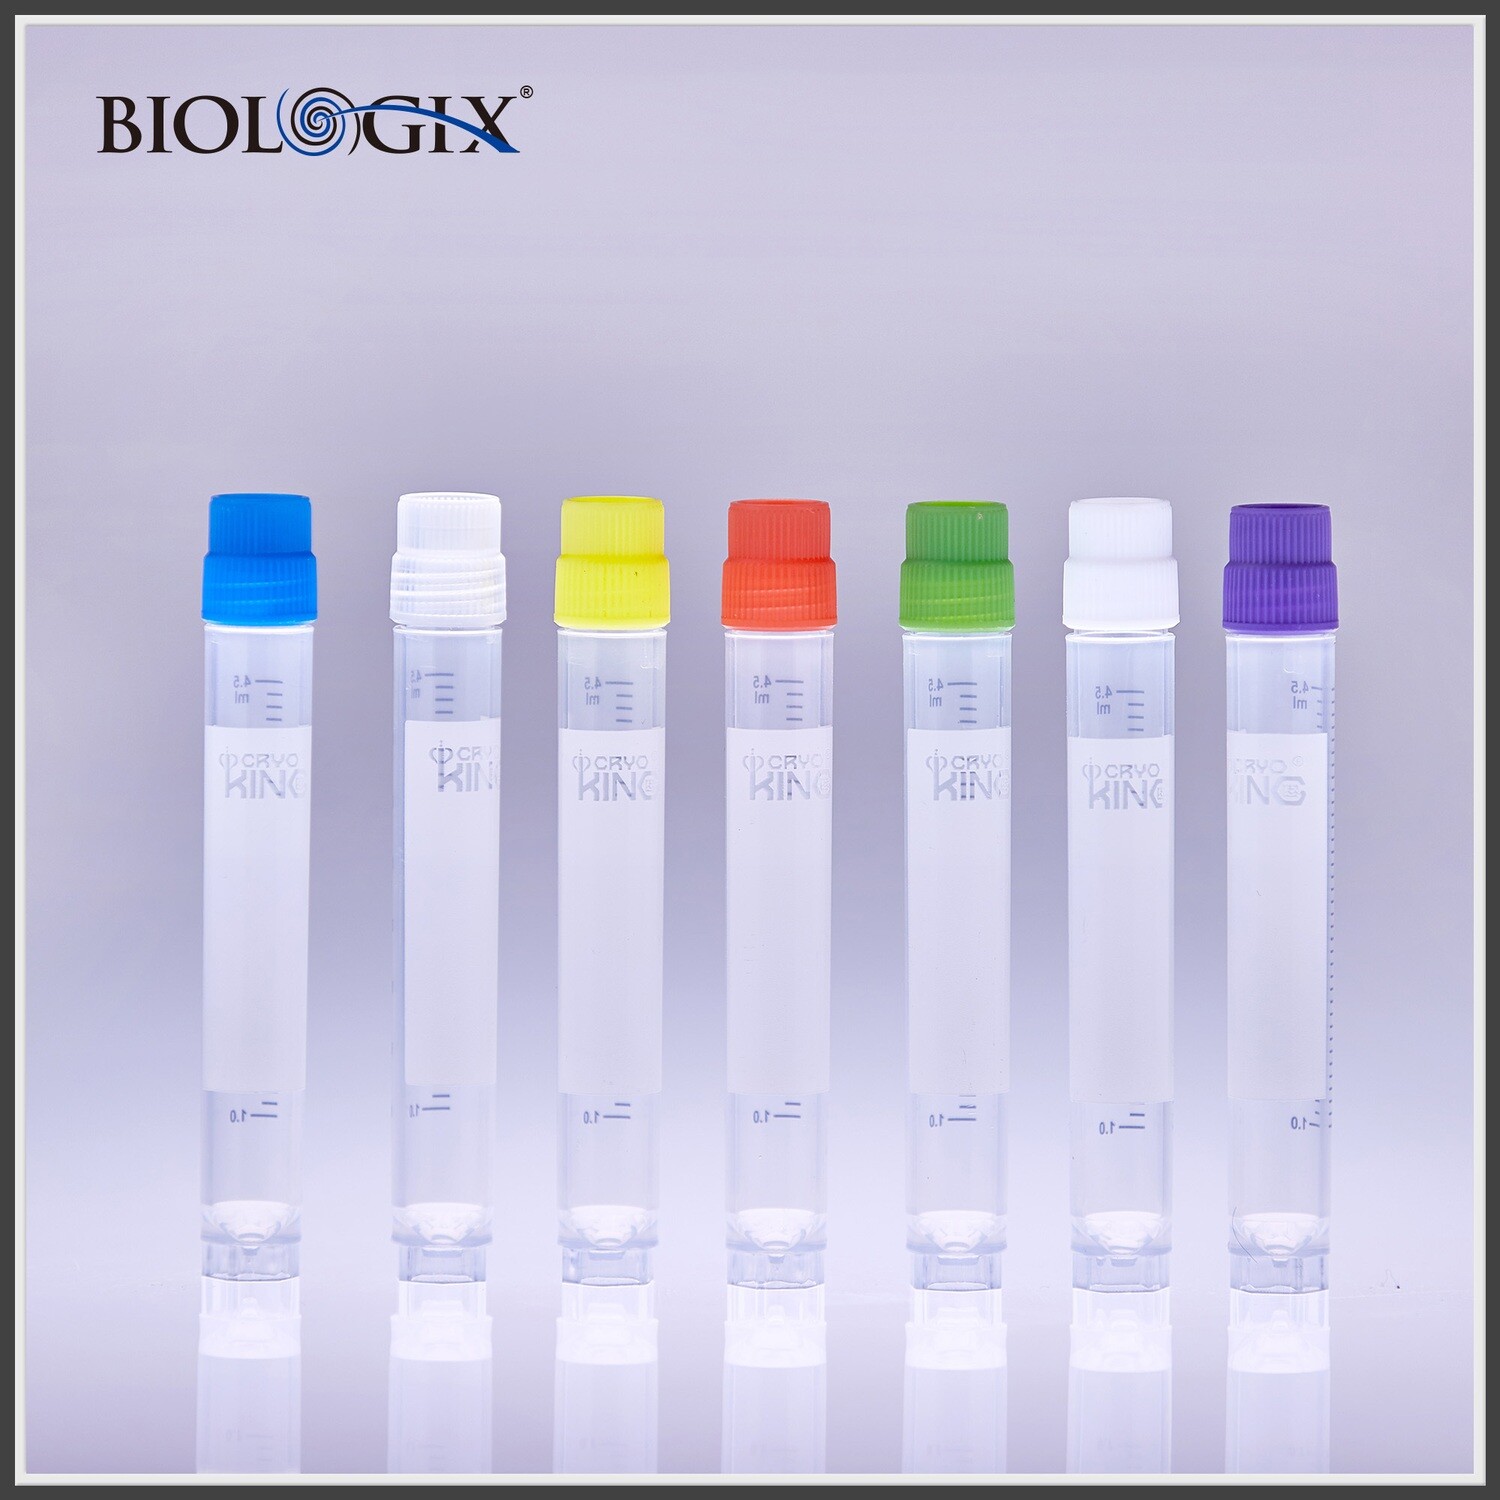 CryoKing Cryovial 5.0ml Plastic Cryogenic Vial Tube for Sample Collection and Storage (External Thread, Non-Barcoded)